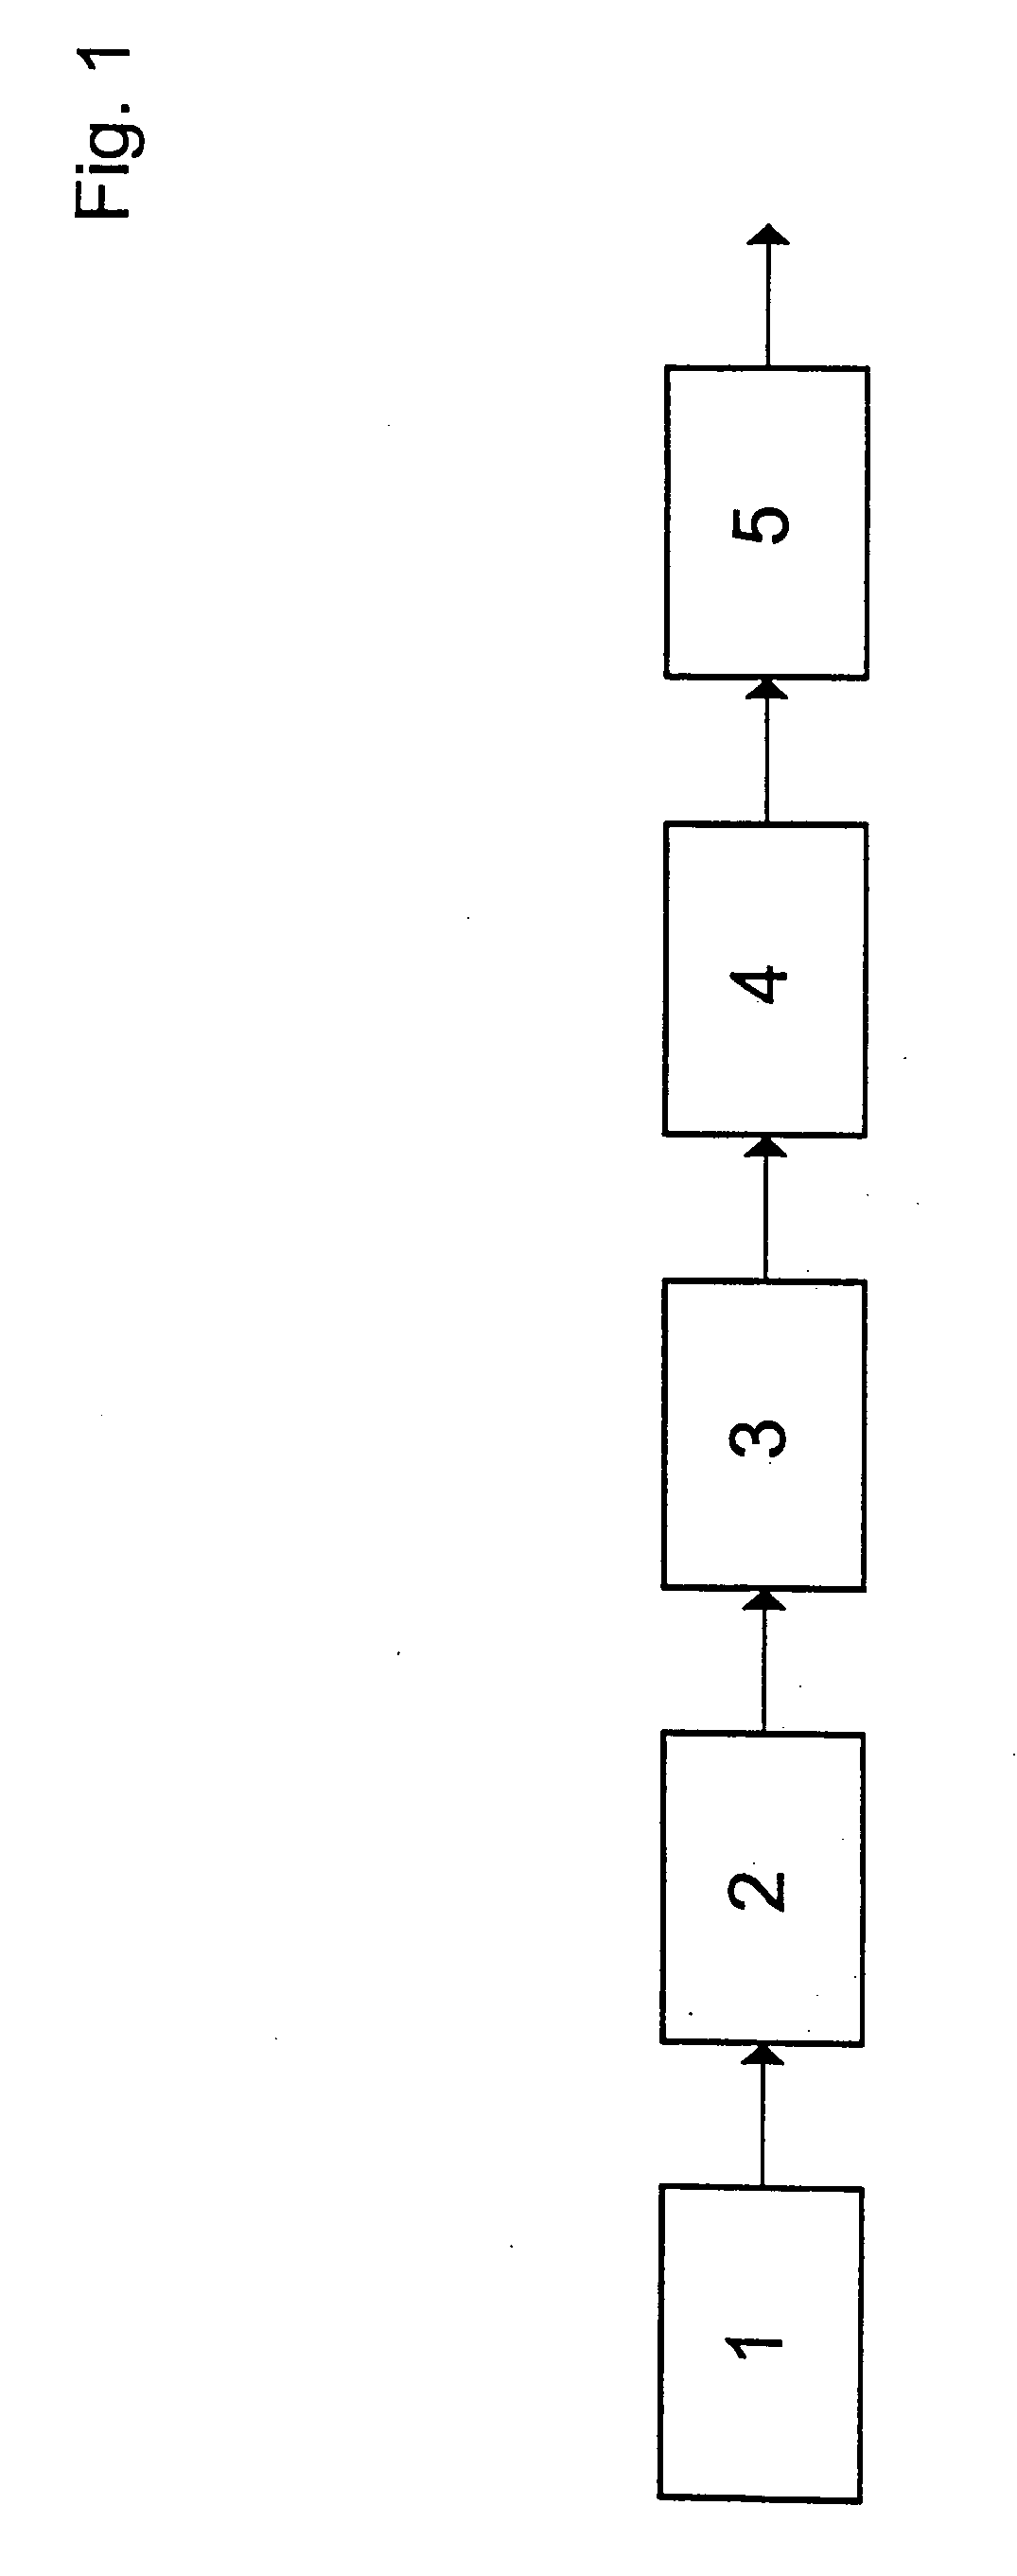 Method and device for producing synthesis gases by partial oxidation of slurries prepared from fuels containing ash and full quenching of the crude gas